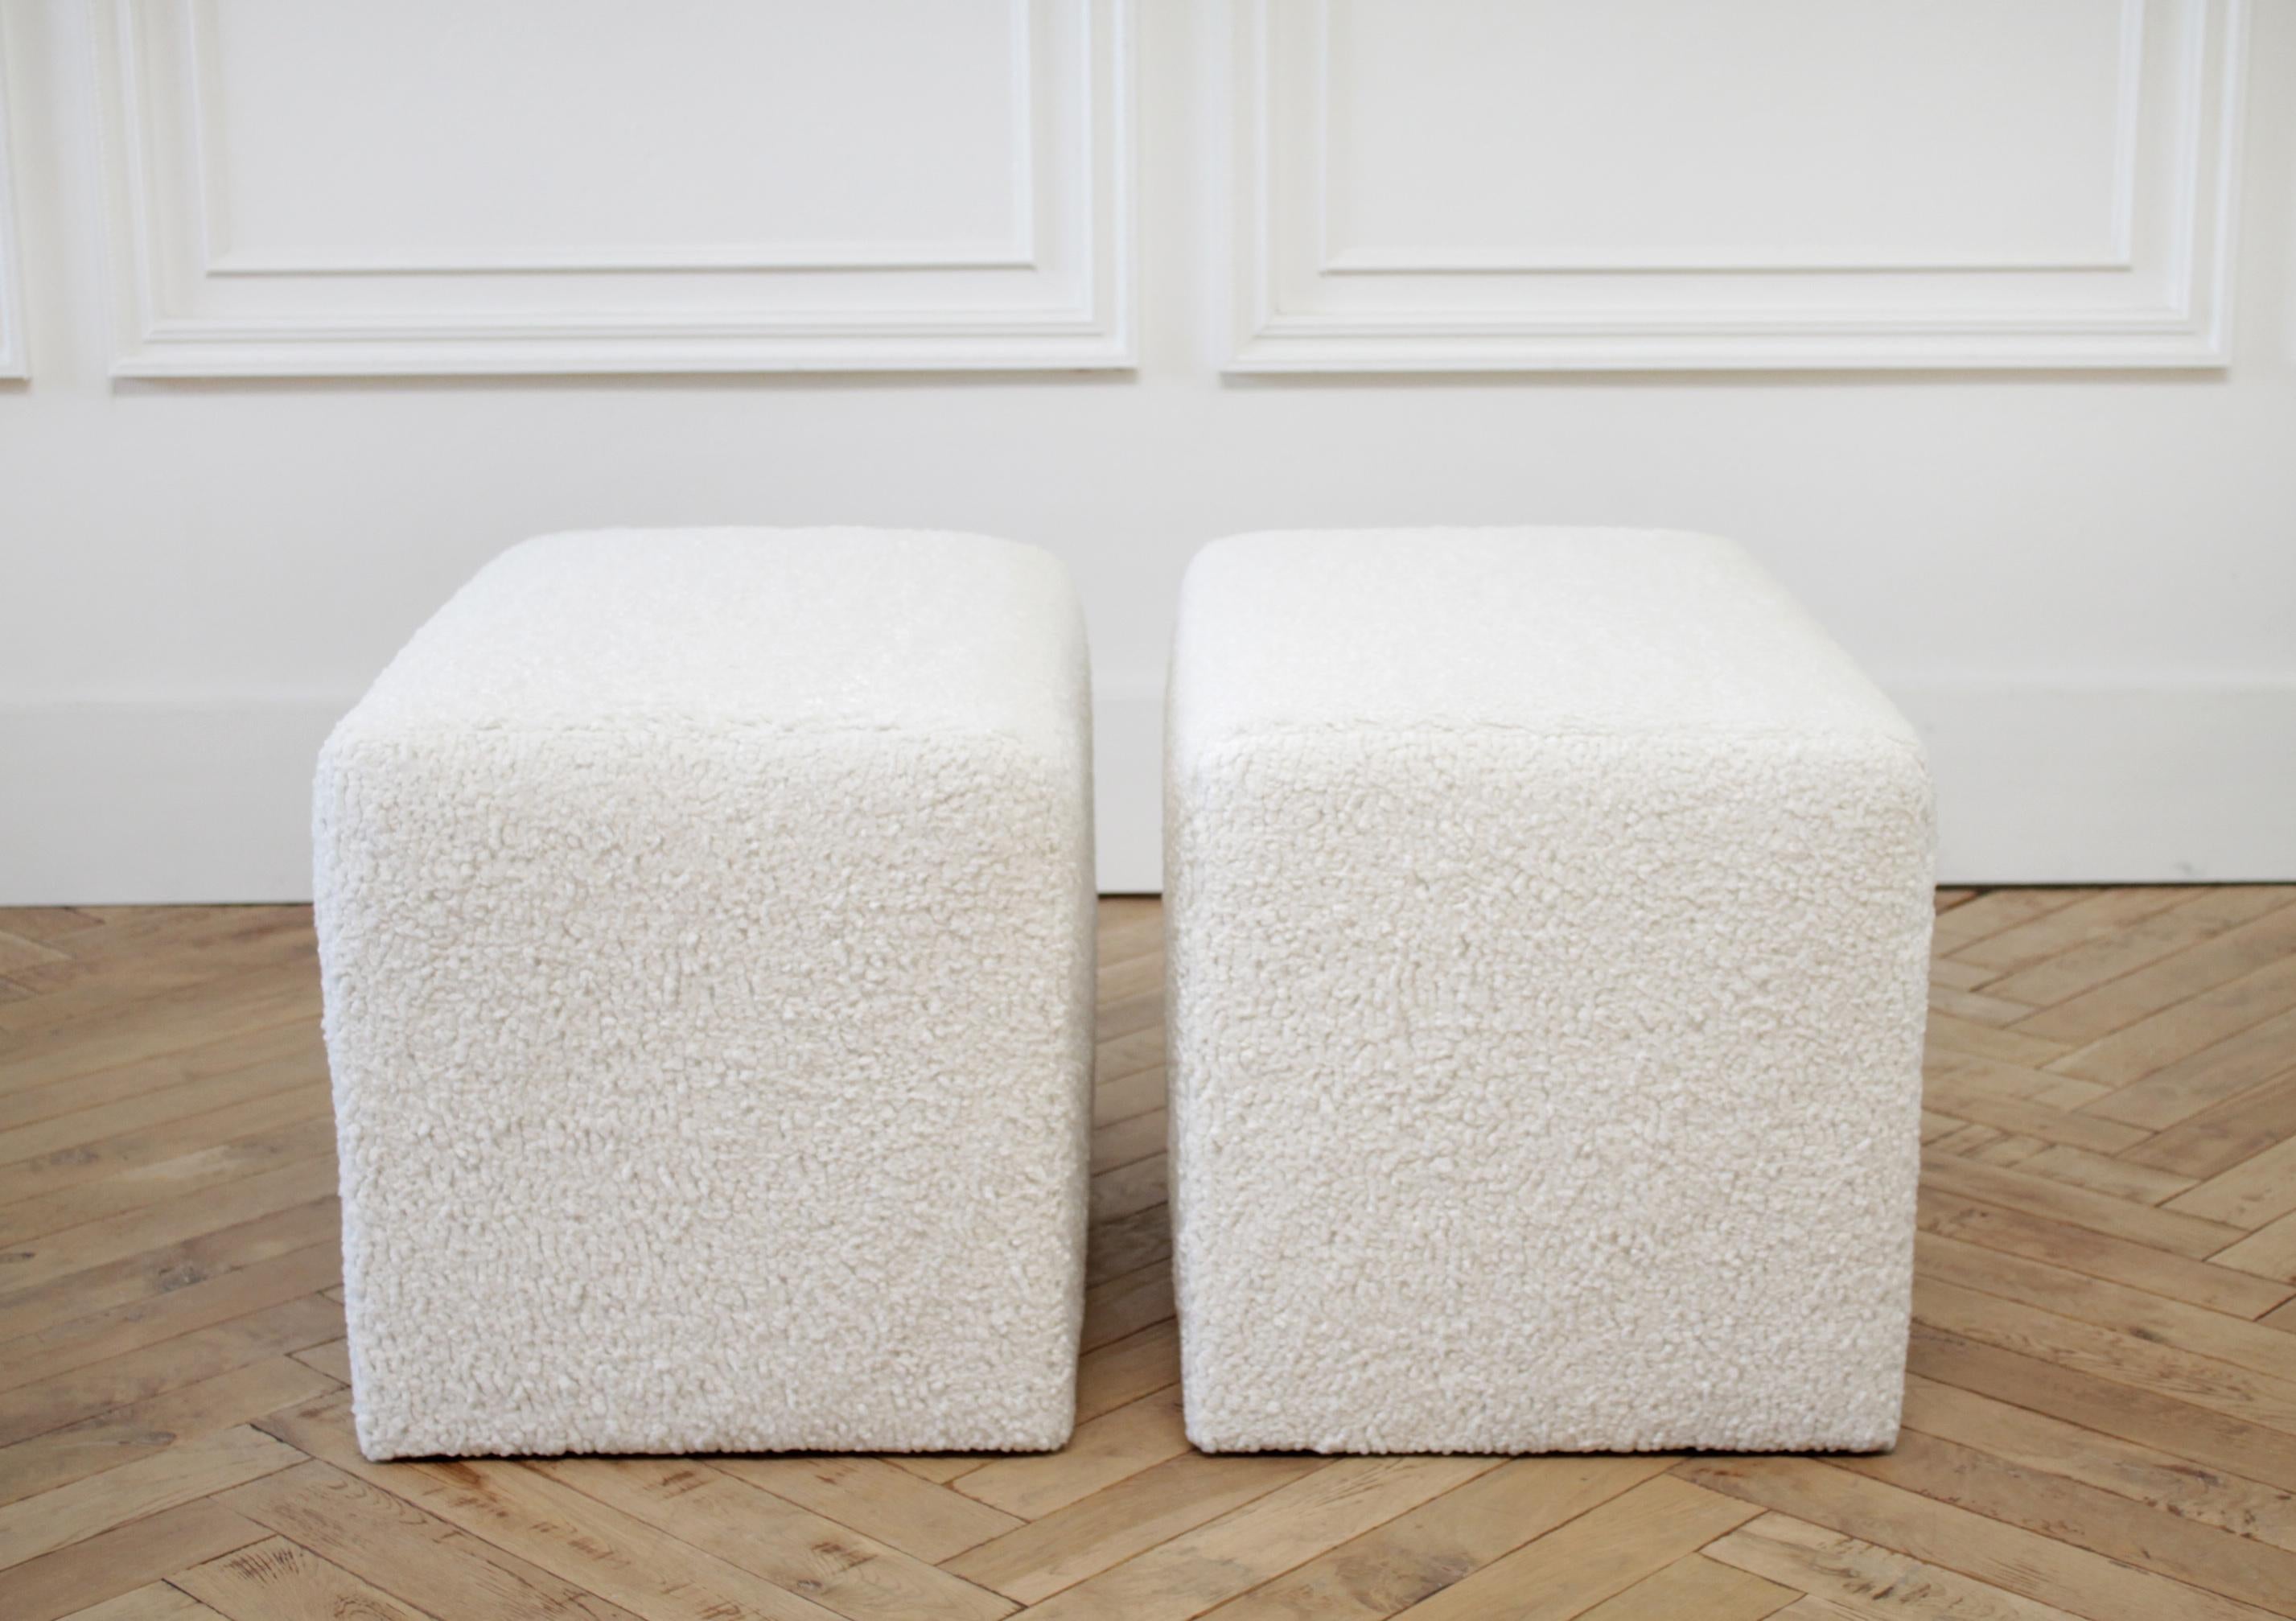 Custom made sheepskin cube ottomans
Custom designed and made full bloom cottage these natural faux sheepskin ottomans are a great accent piece. Wood frame, and foam wrapped, make these structurally solid, and comfortable to sit on. Base has 4 small